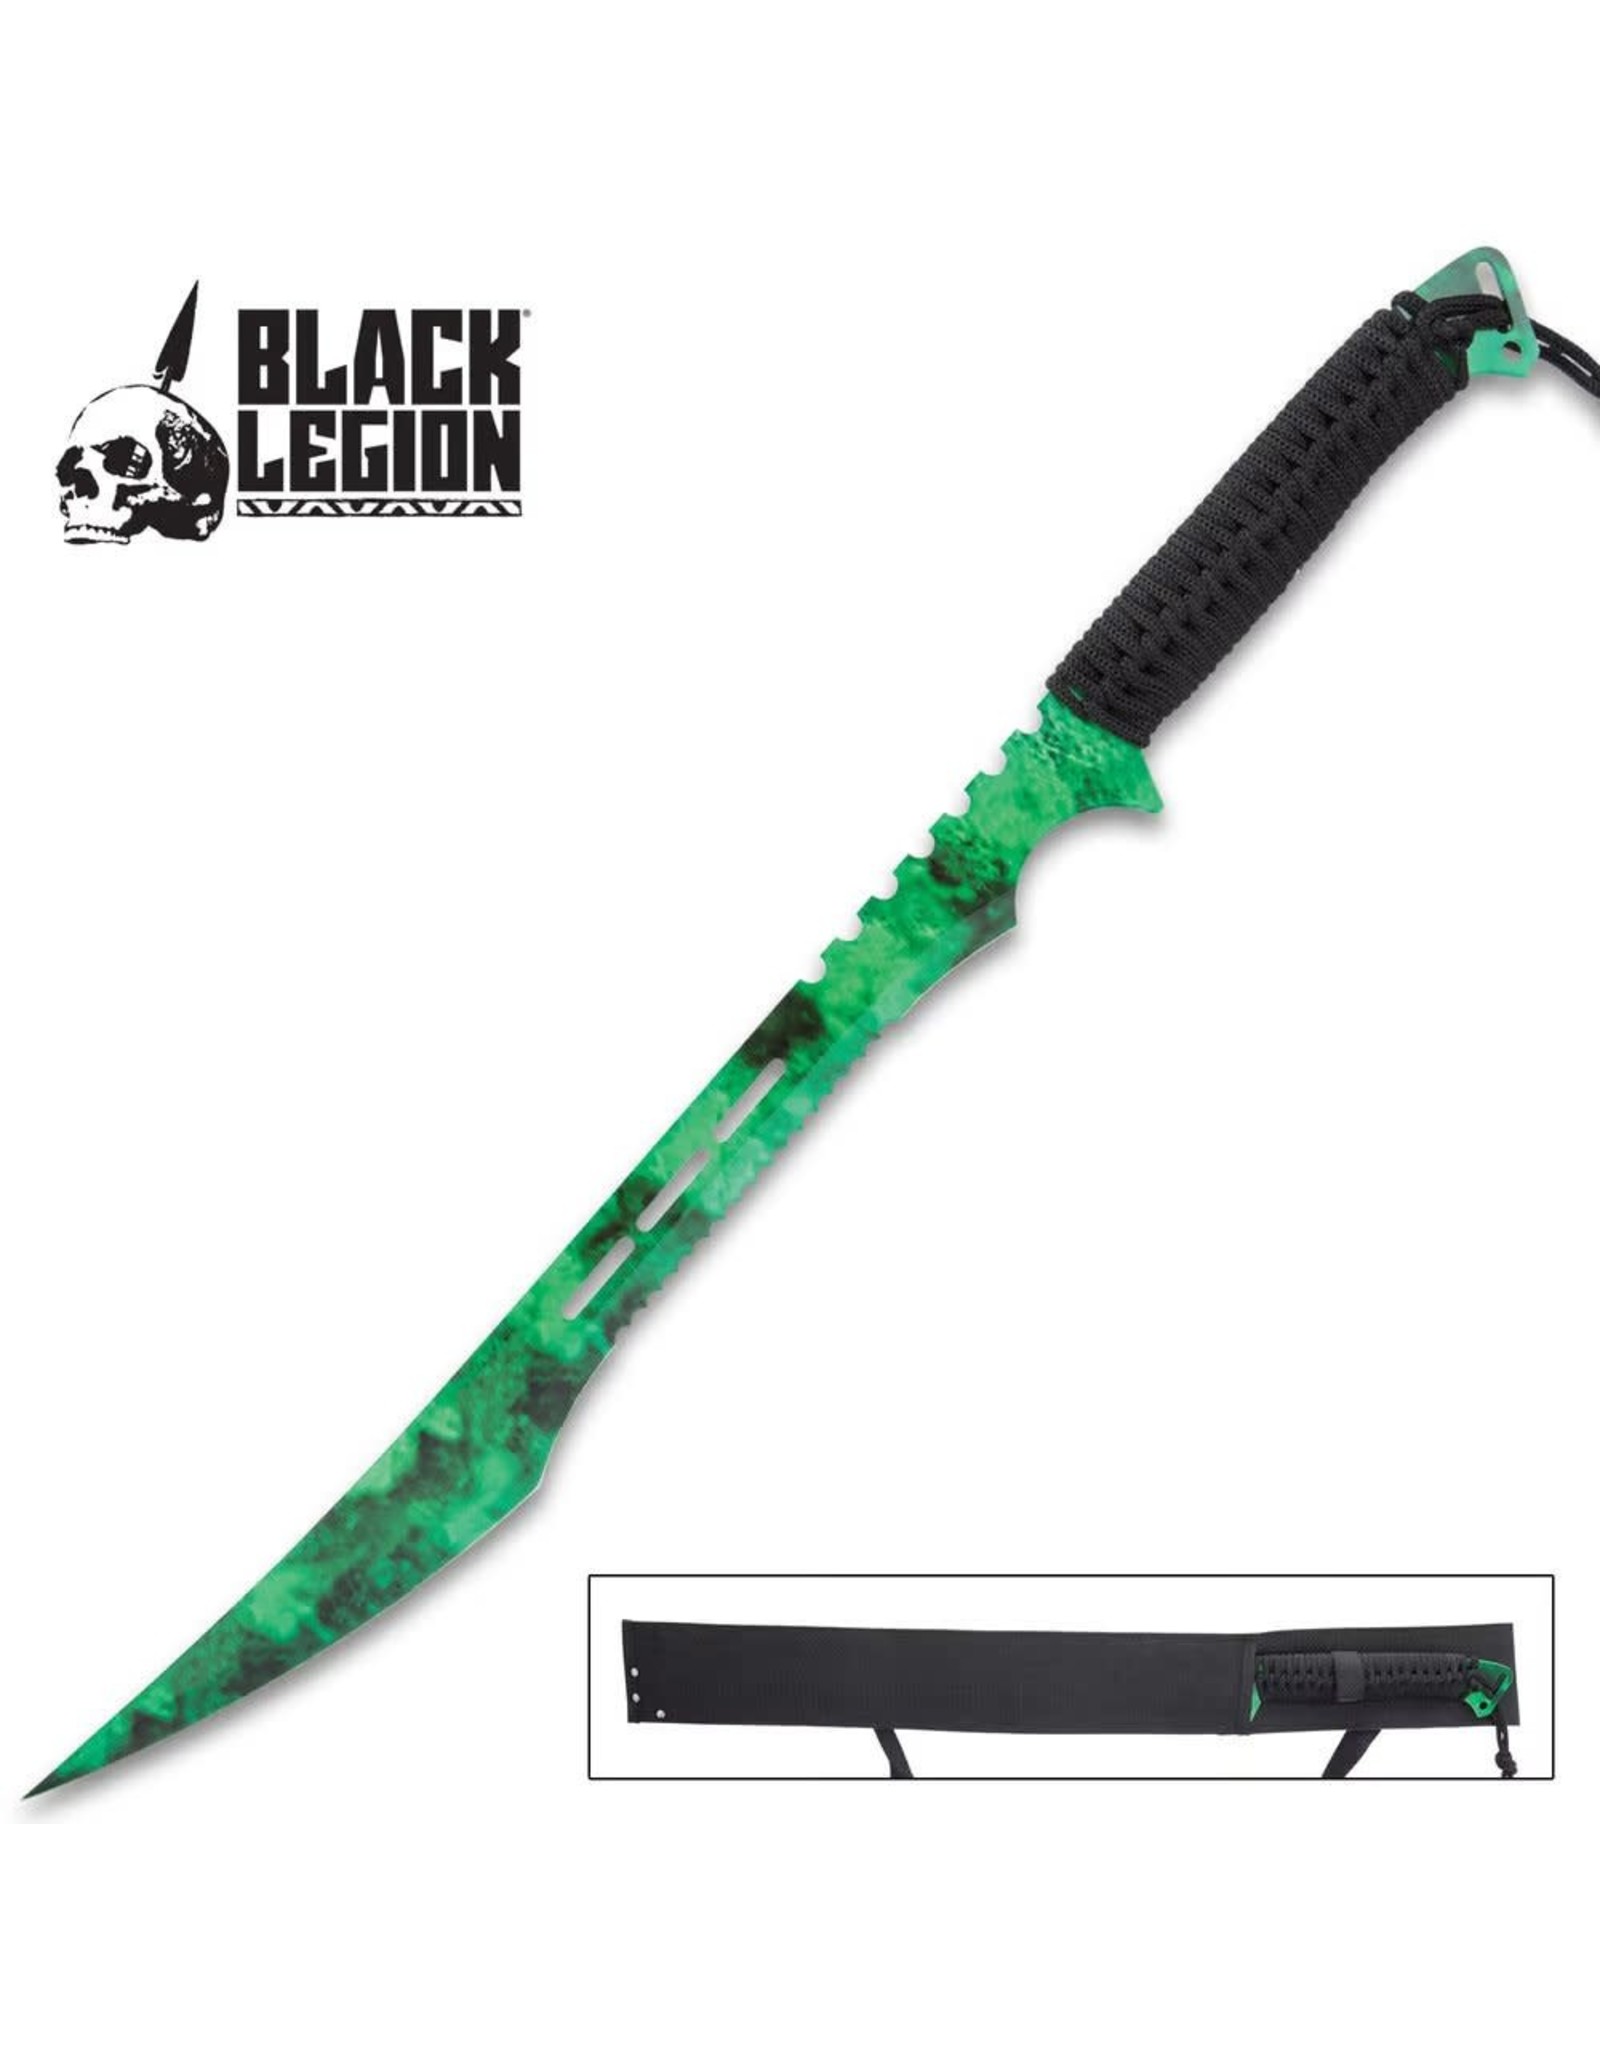 Black Legion Black Legion Poison Cloud Ninja Sword With Sheath - Stainless Steel Construction, Partially Serrated, Cord-Wrapped Handle - Length 27”